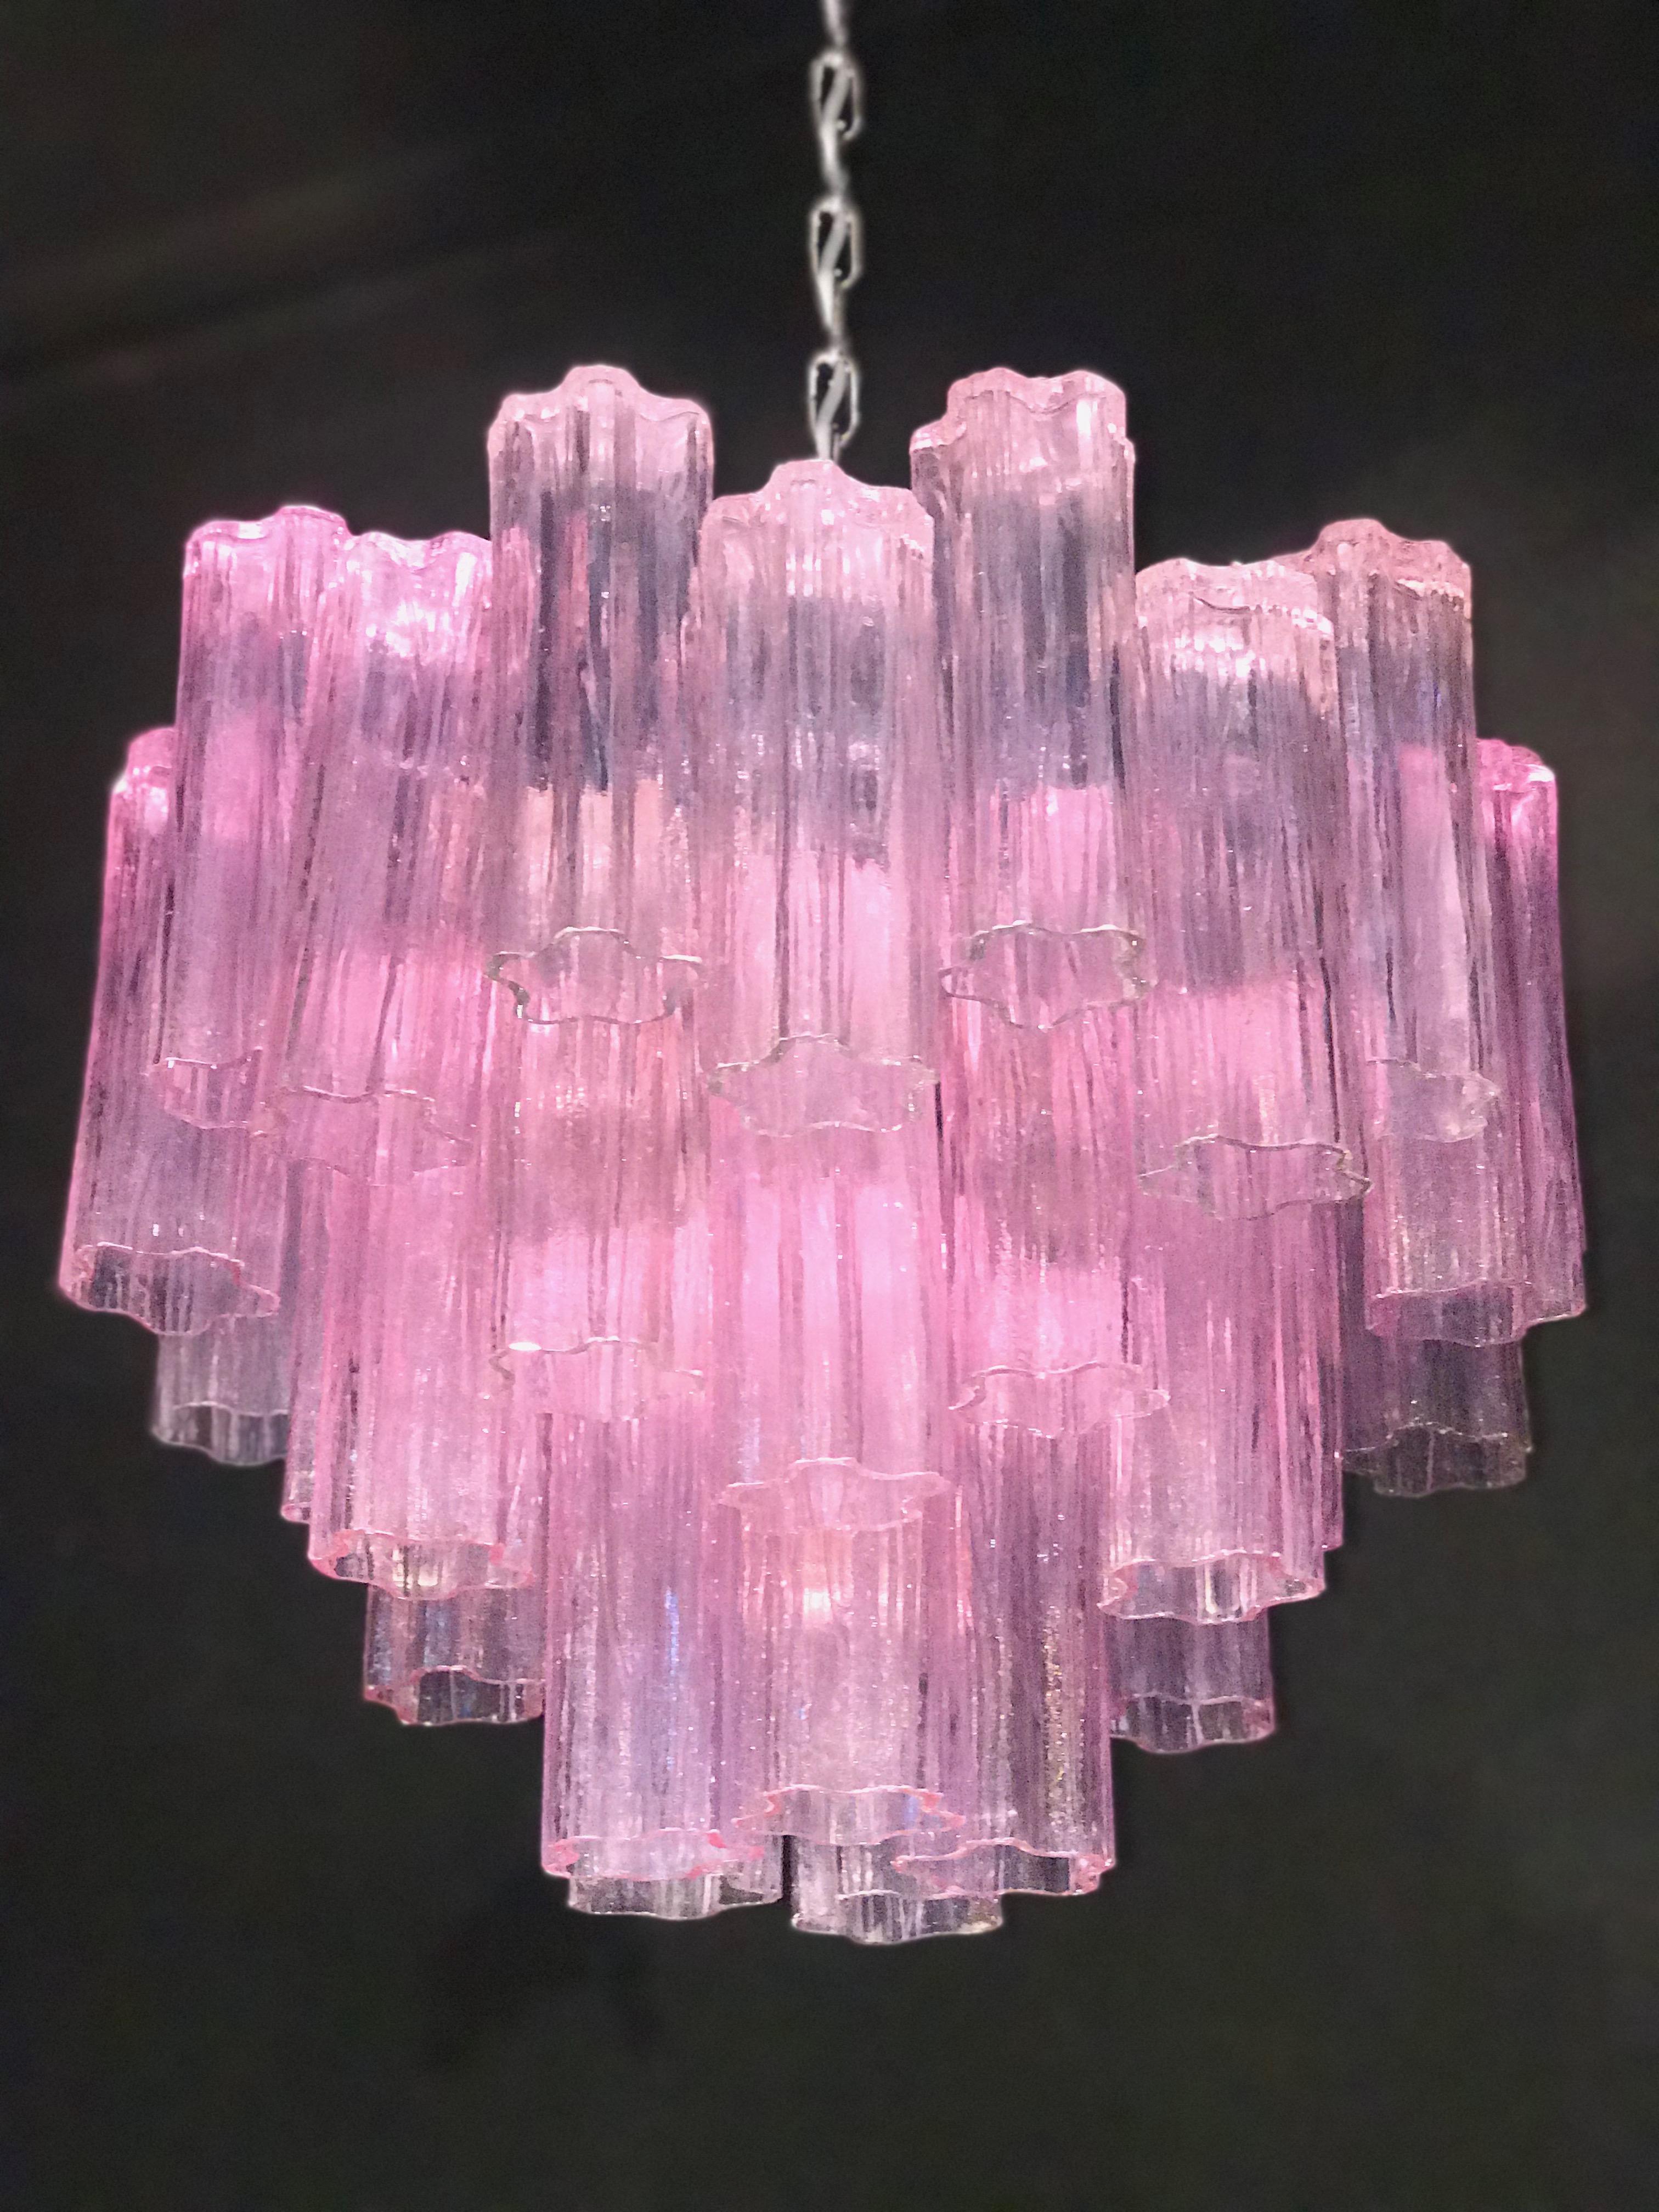 Amazing chandelier includes precious pink tronchi Murano glasses 20 cm long.
Nickel-plated metal structure on three levels,
Perfect vintage condition.
Available 8 chandeliers and 4 pairs of sconces.
Measures: Height with chain cm 110, without